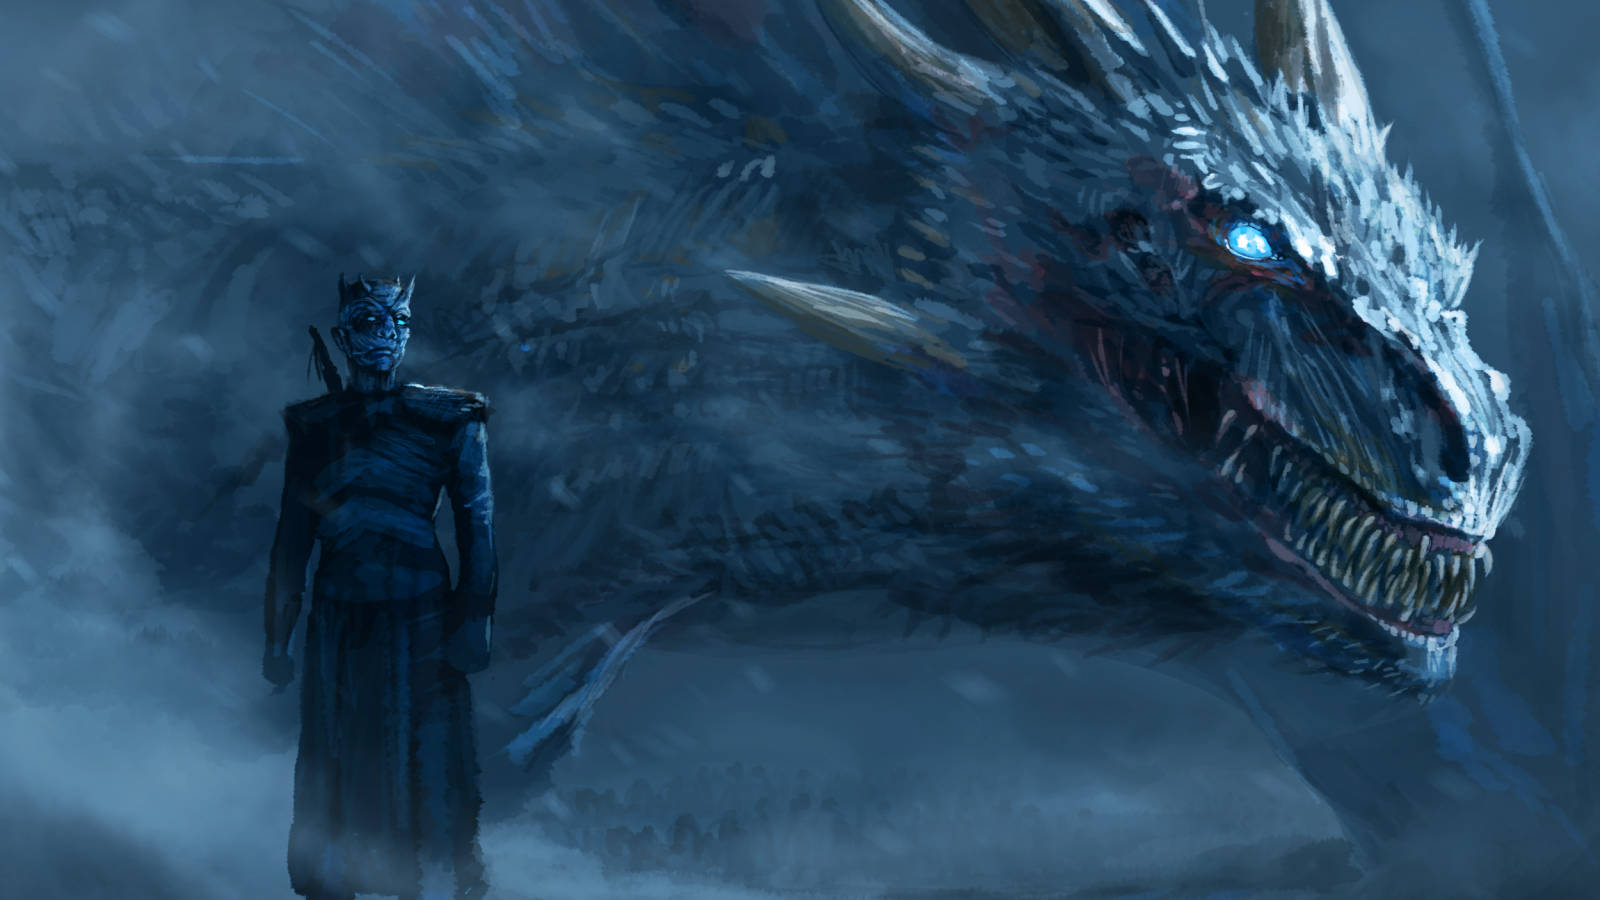 The Night King rules the dark of winter in HBO's Game of Thrones. Wallpaper